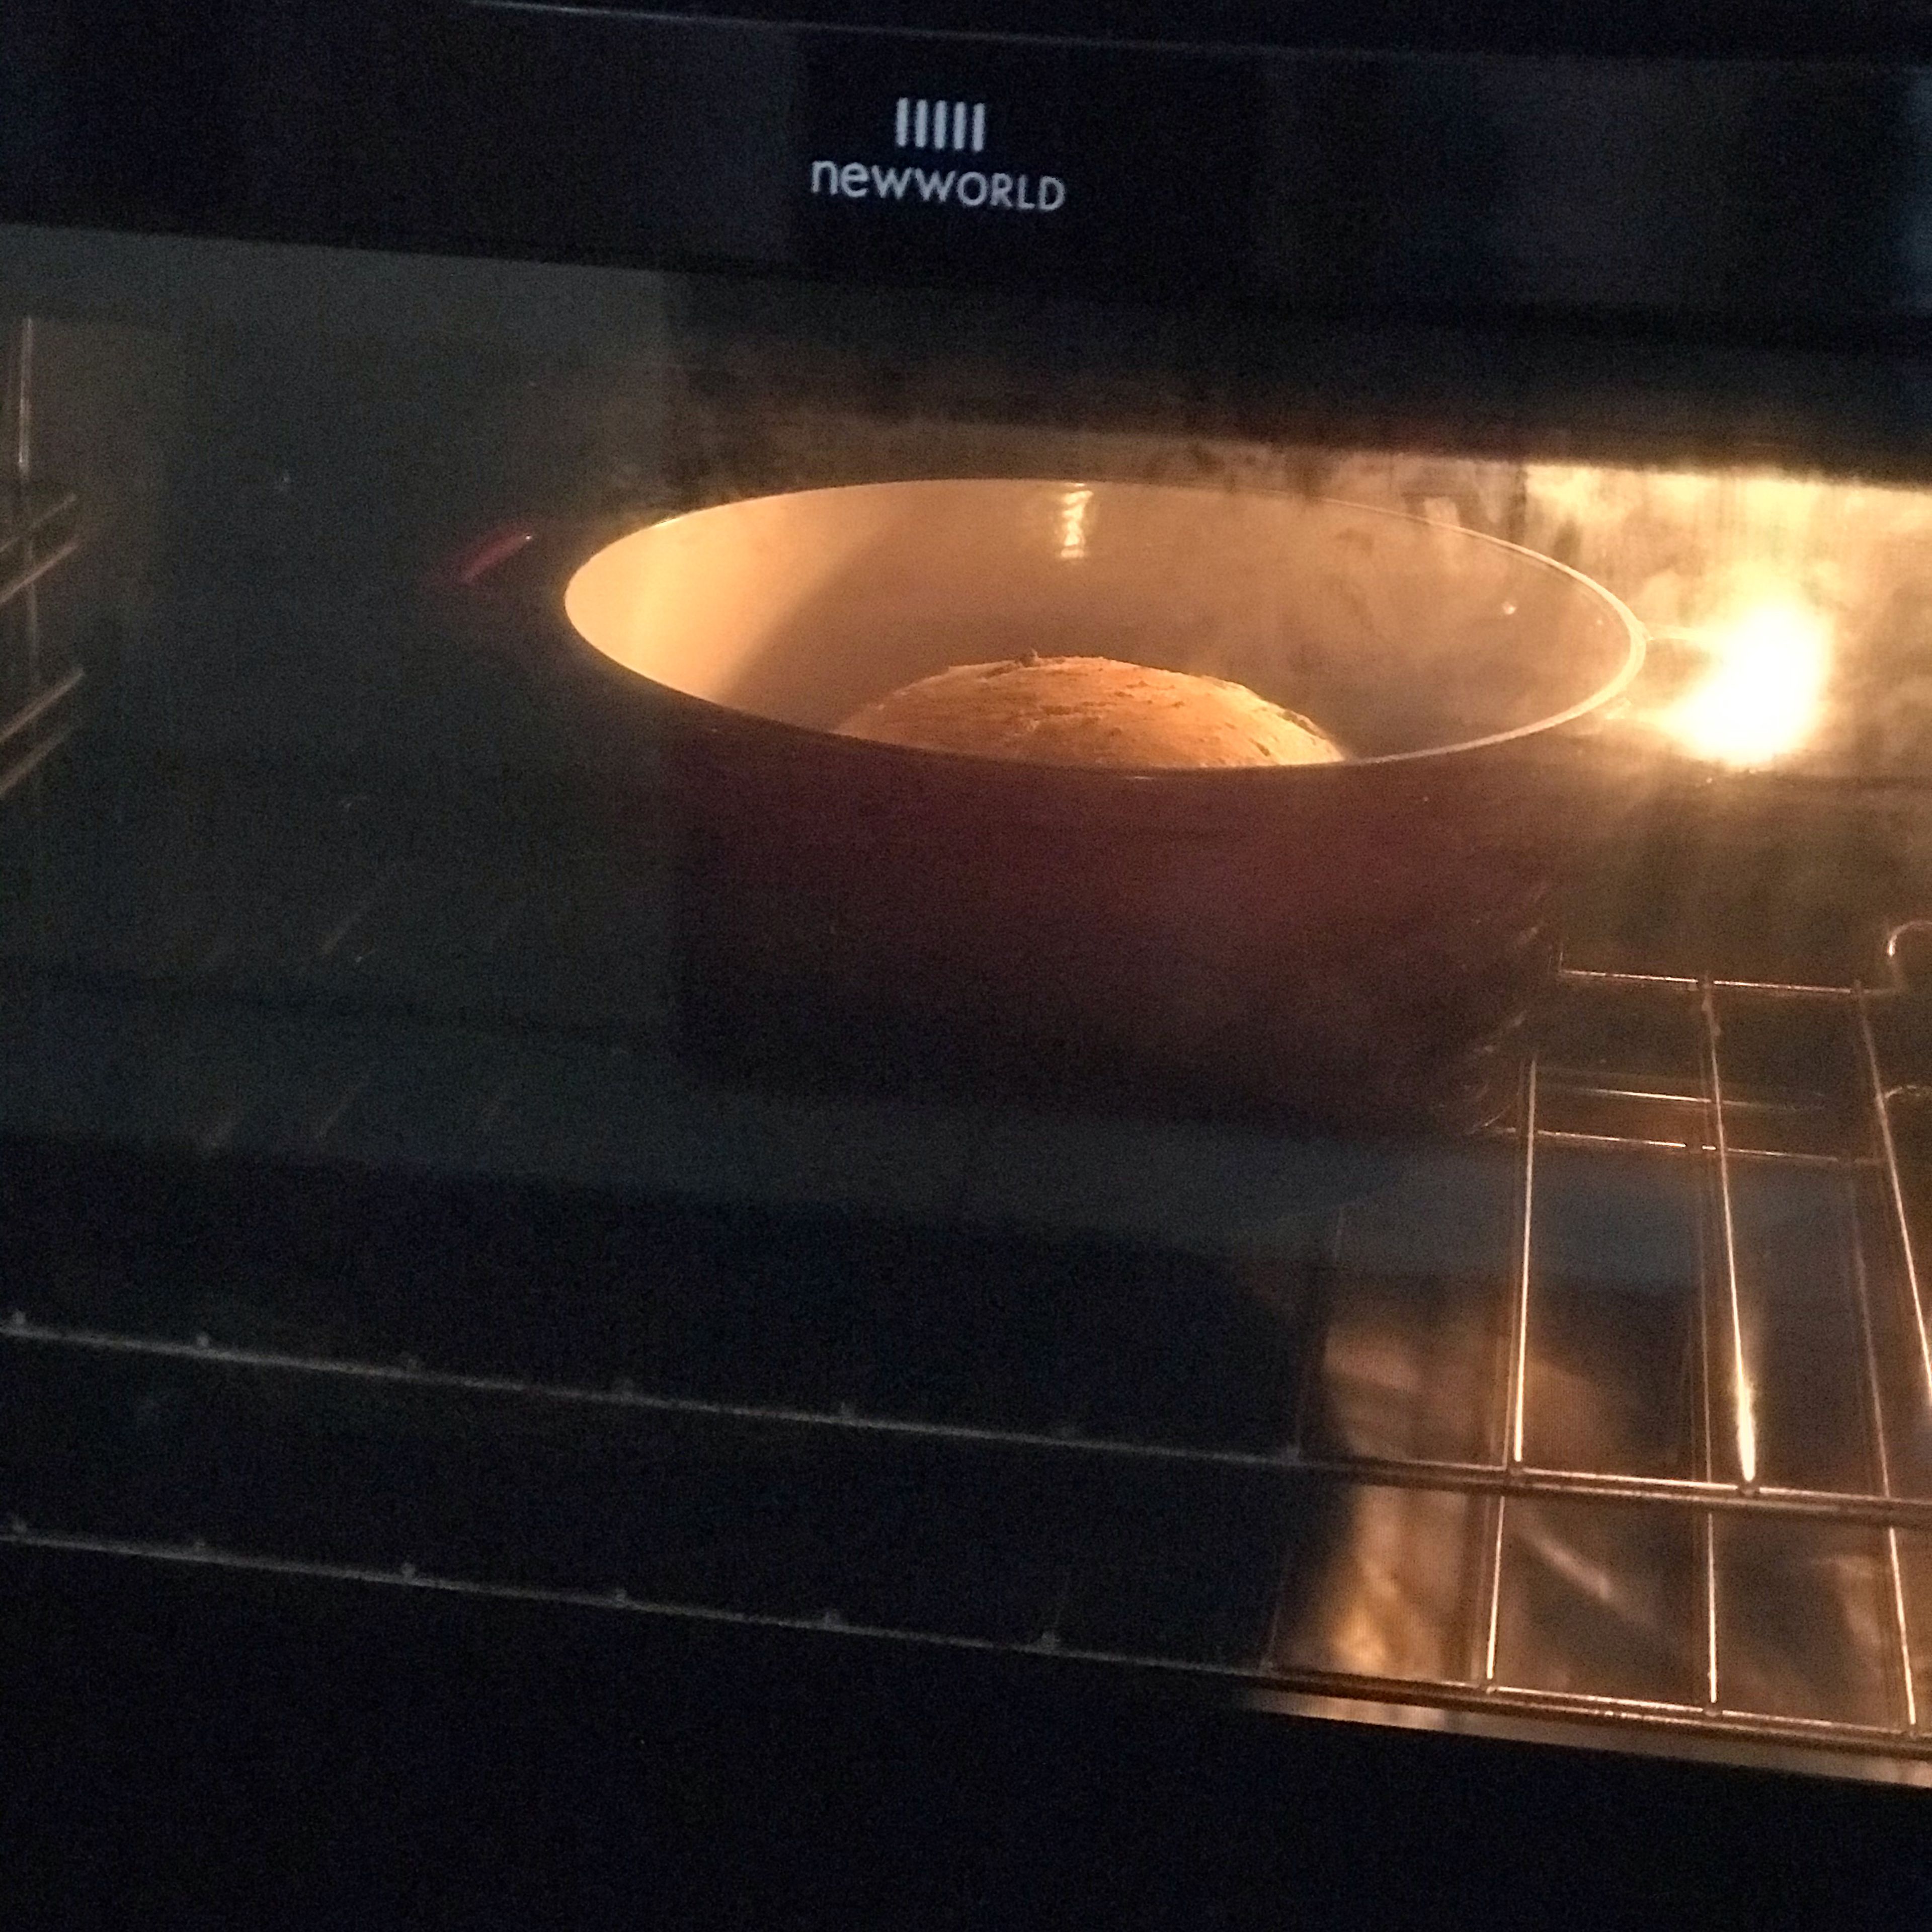 After take the dough and put it inside the pot and put the lid on. Then put the pot in the oven at 240 Celsius for 15 min. Then after 15min take the lid off from the pot and change the temperature of the oven to 230 Celsius for another 30min.